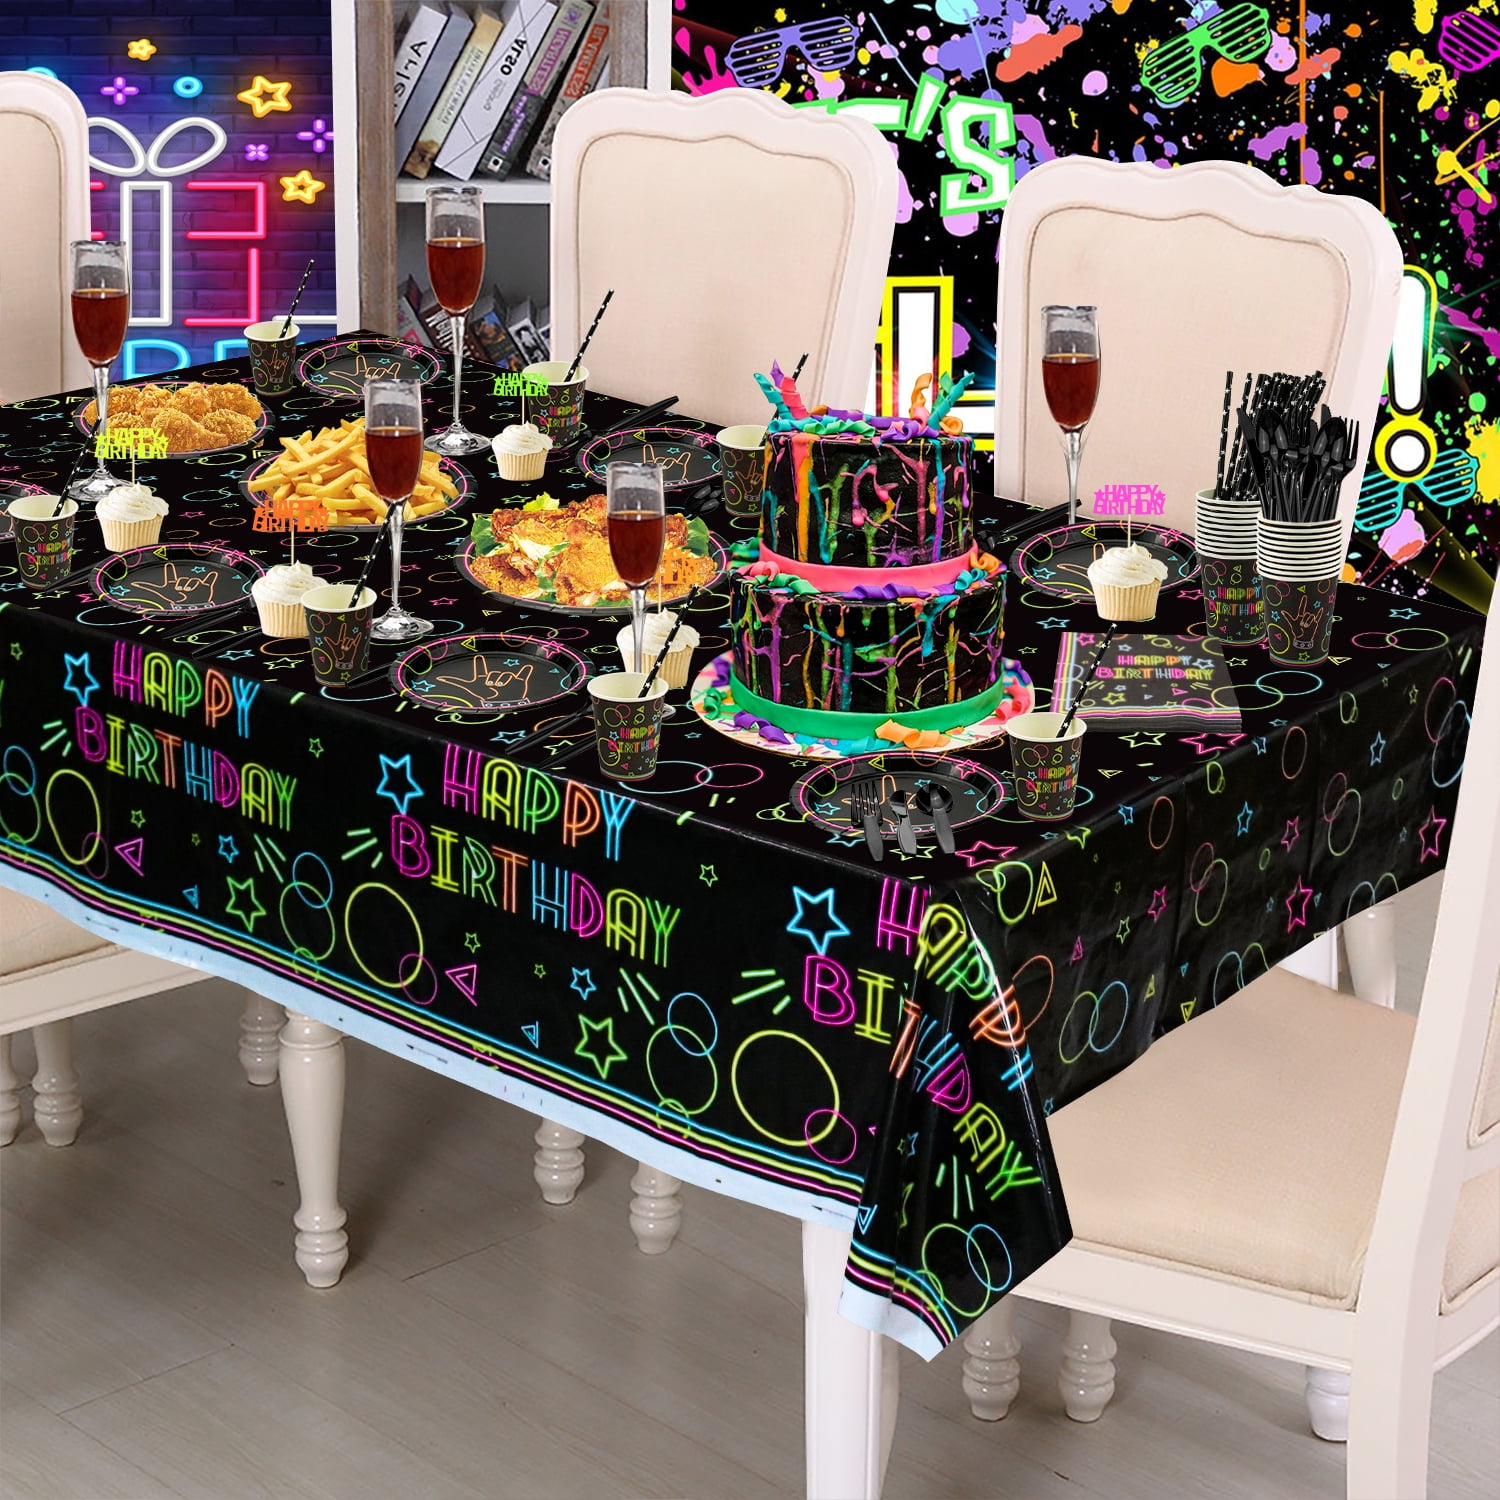 458 Pcs Glow in The Dark Party Supplies - Include Glow in The Dark  Balloons, Banner, Glow Sticks, Tableware and Tablecloths for Glow Party  Supplies